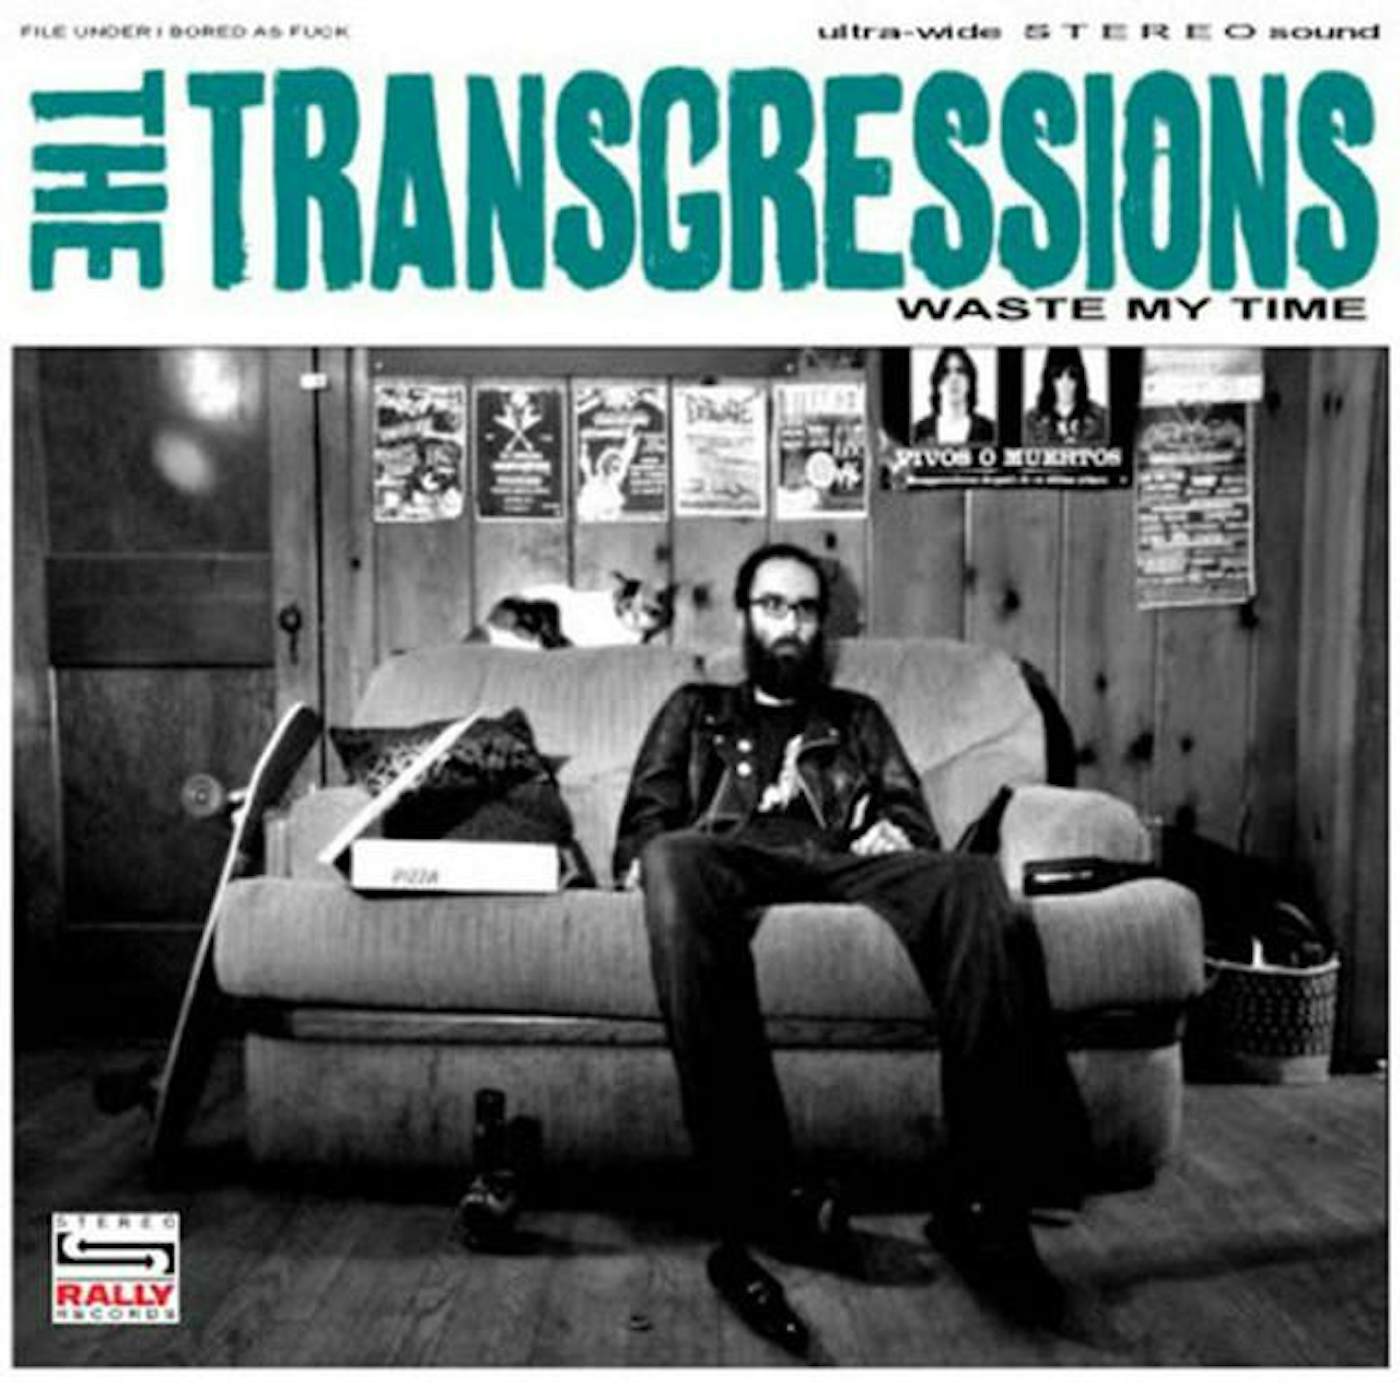 The Transgressions